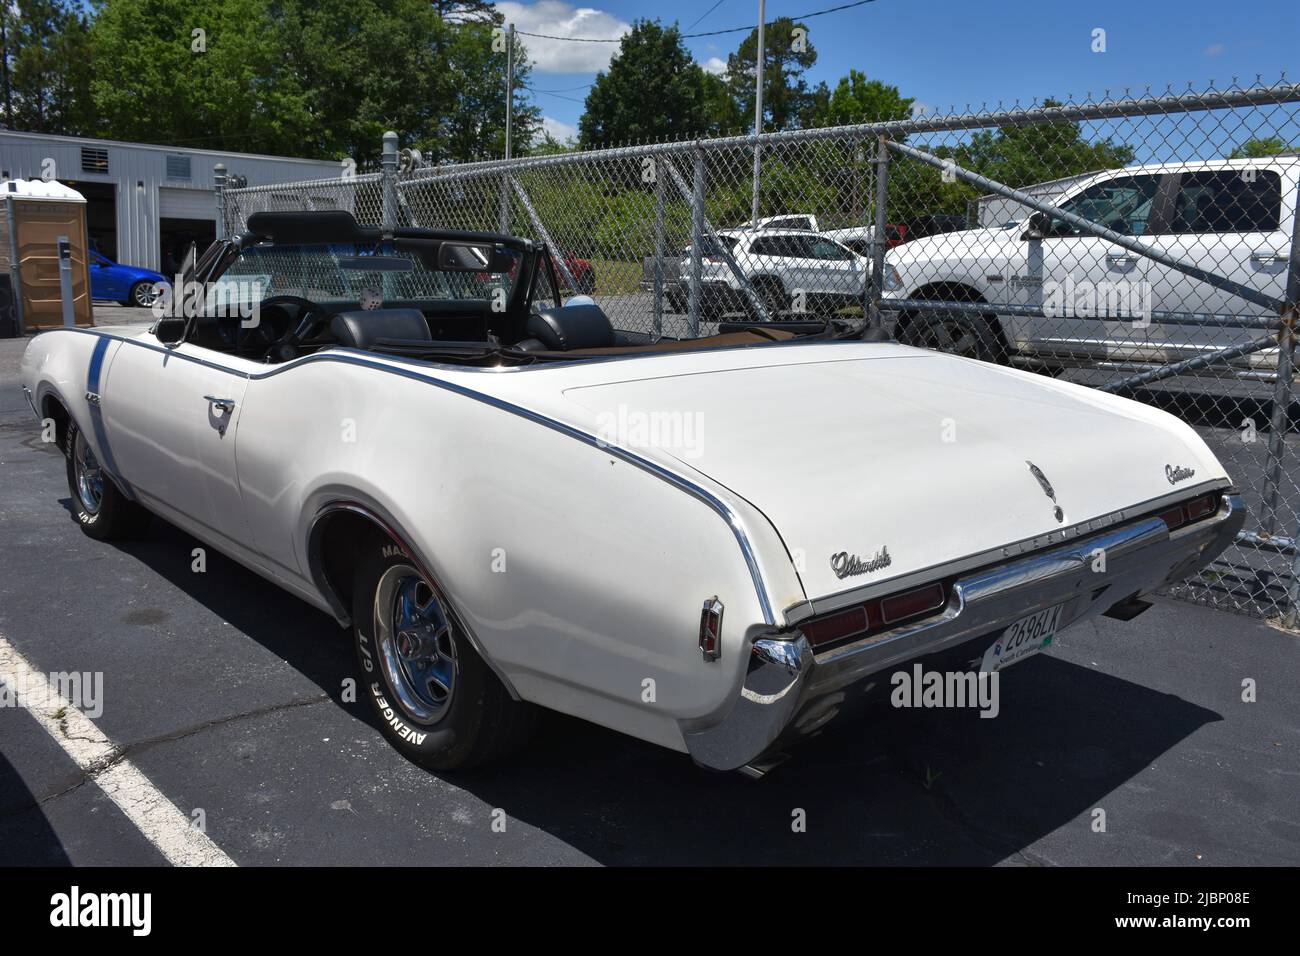 A 1968 Oldsmobile Cutlass 442 Convertible on display at a car show. Stock Photo